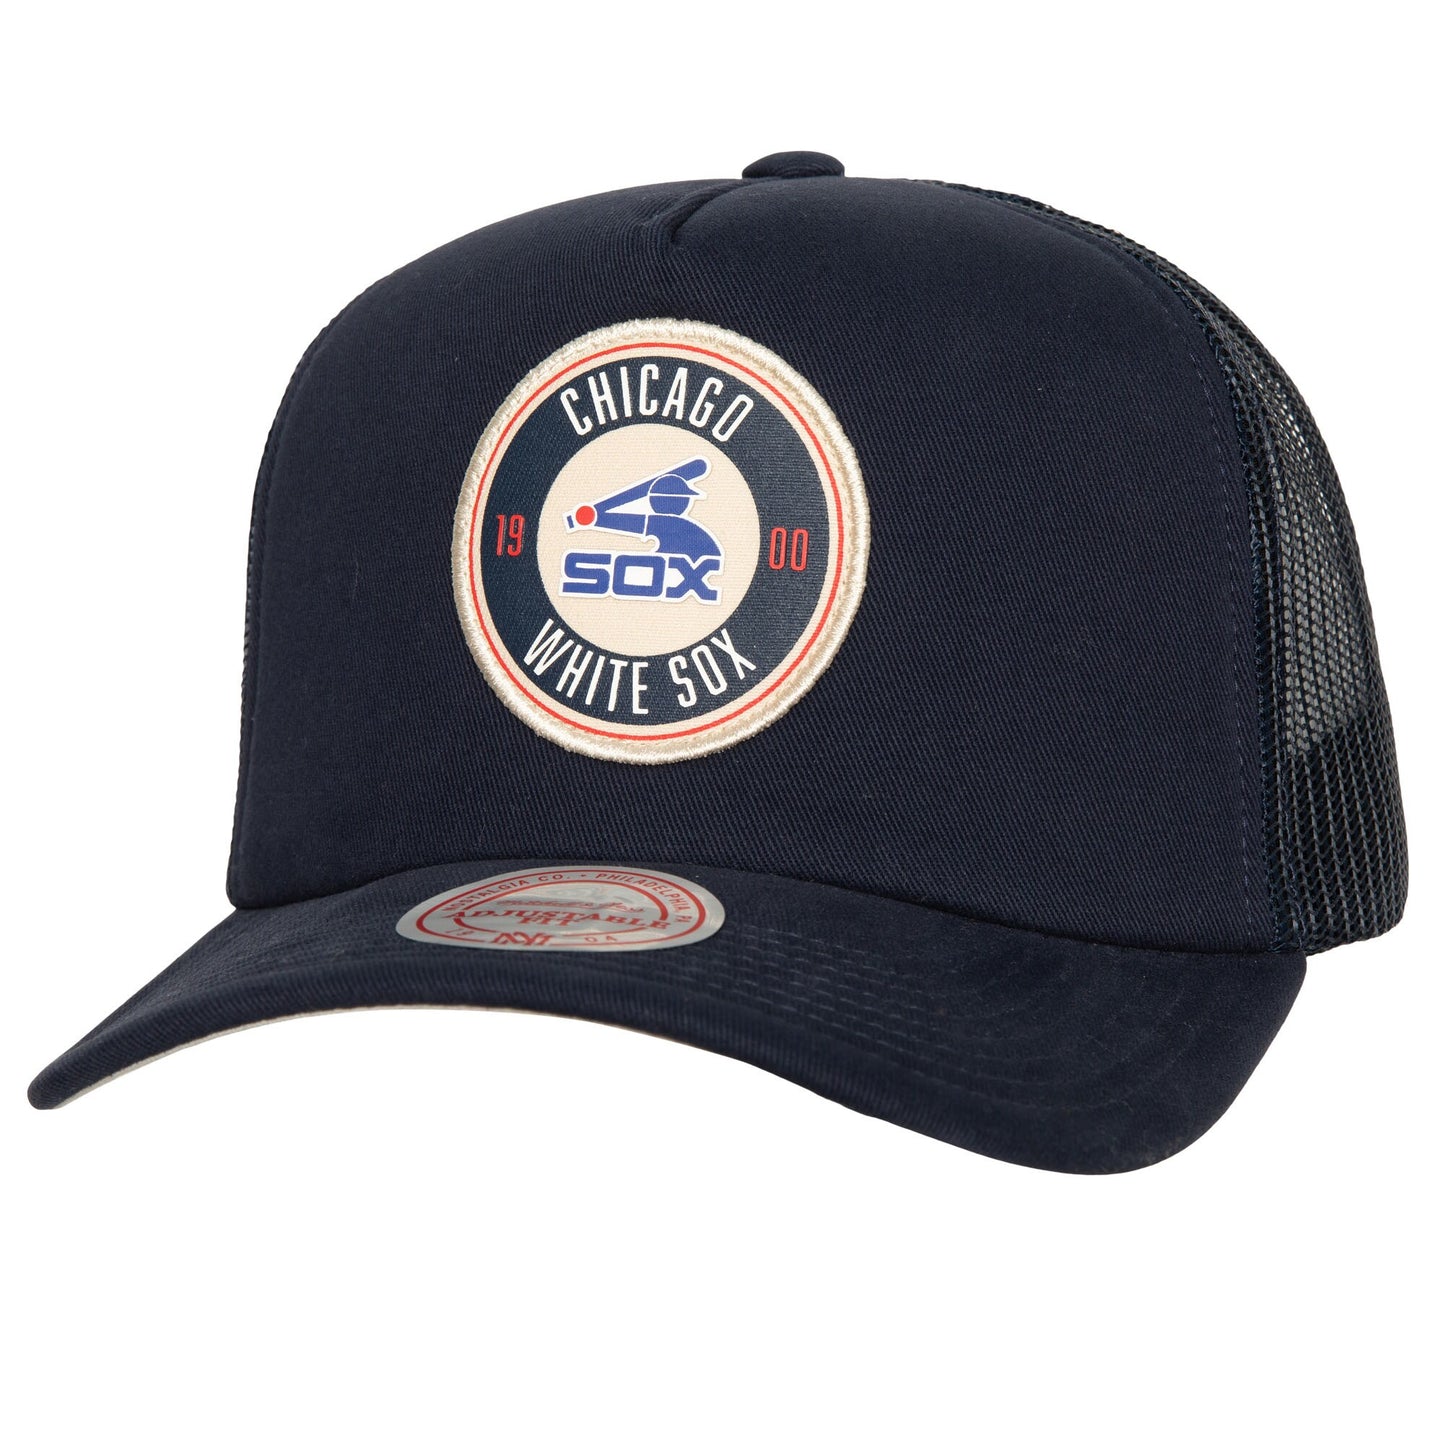 Chicago White Sox Mitchell & Ness Cooperstown Collection Circle Change Trucker Adjustable Hat - Navy